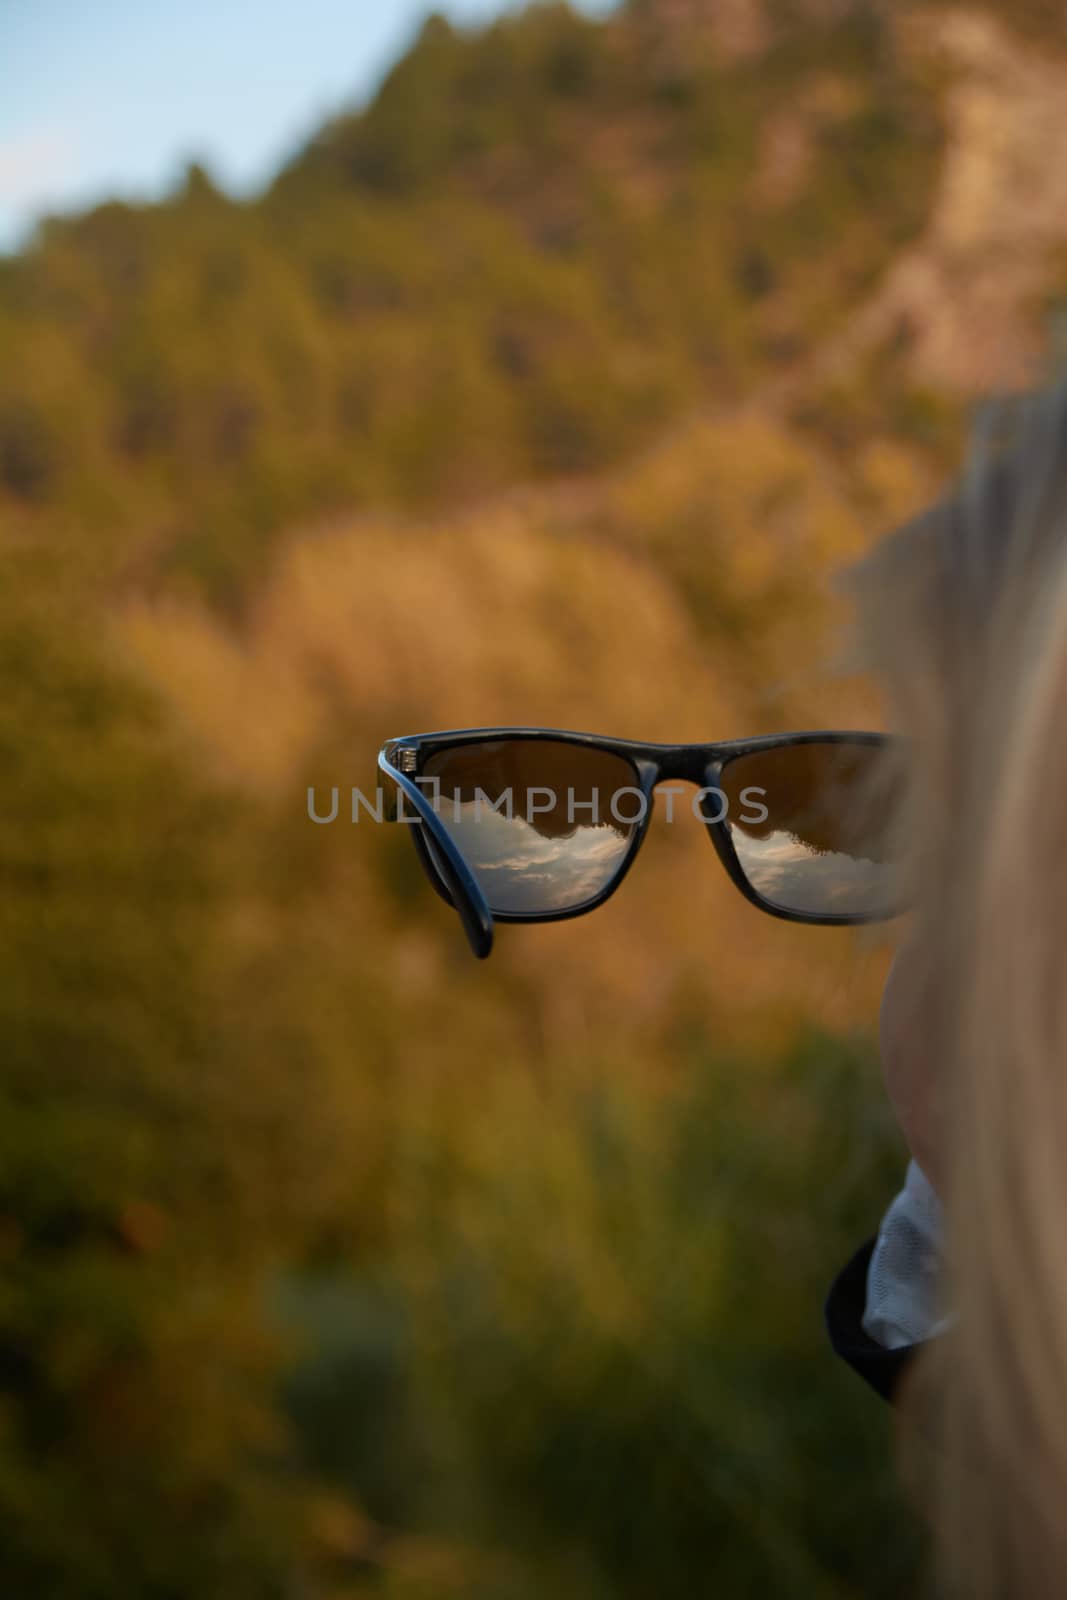 Look at the mountain through other eyes. Looking through the glasses